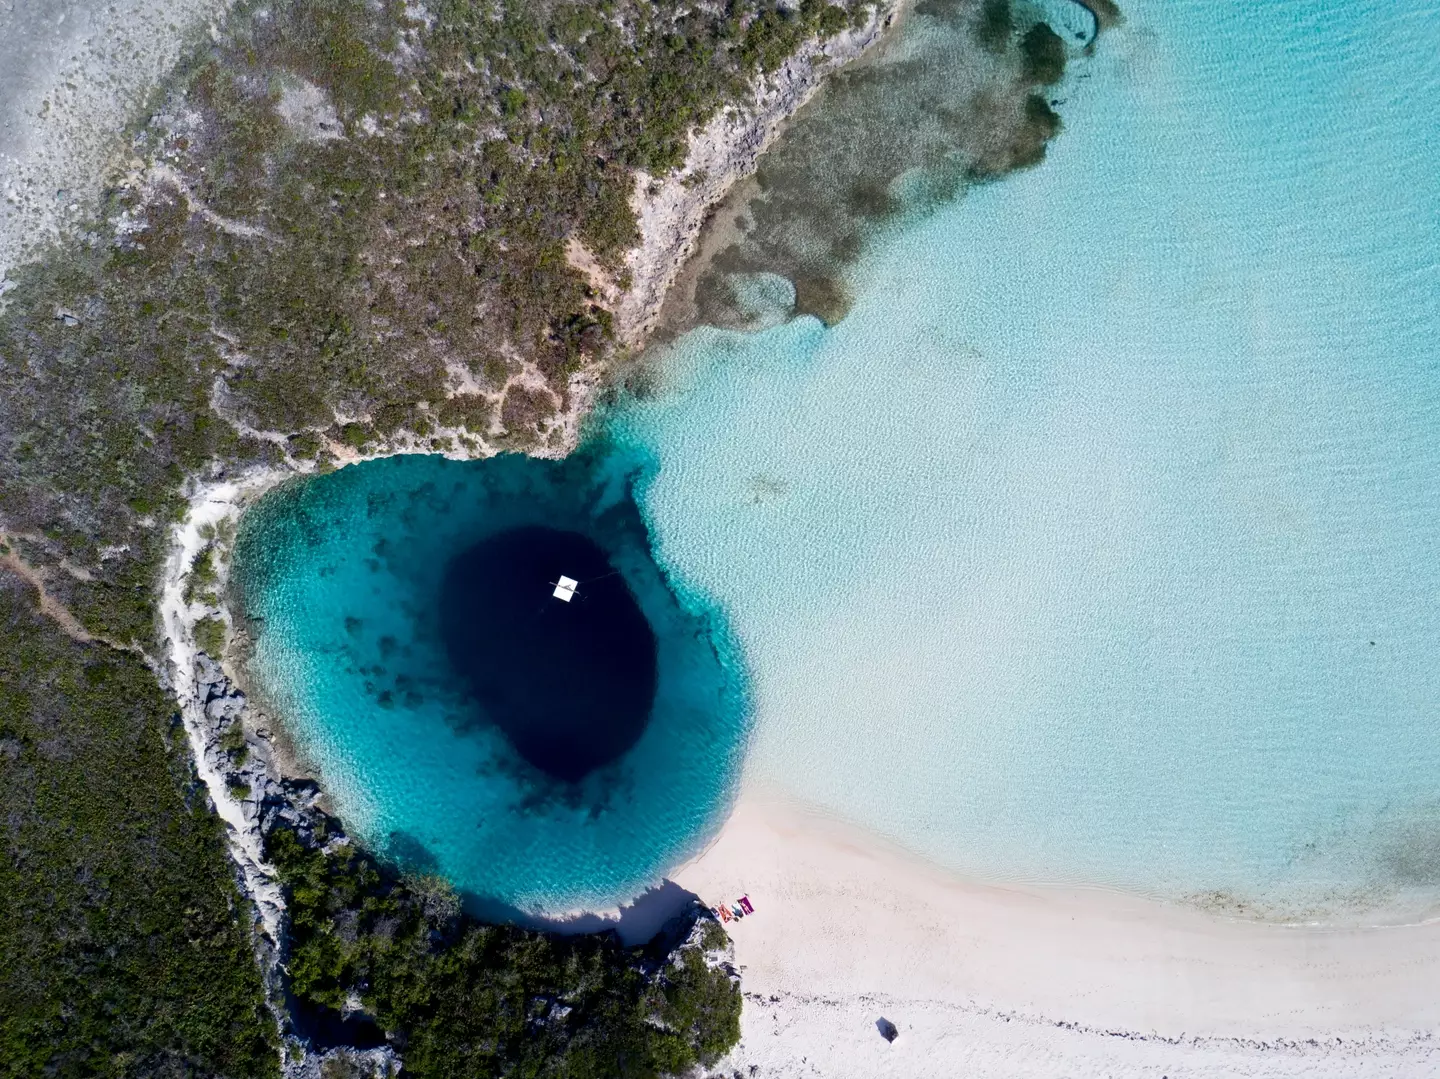 Dean's Blue Hole can be found in The Bahamas. (Matt Porteous/Getty)